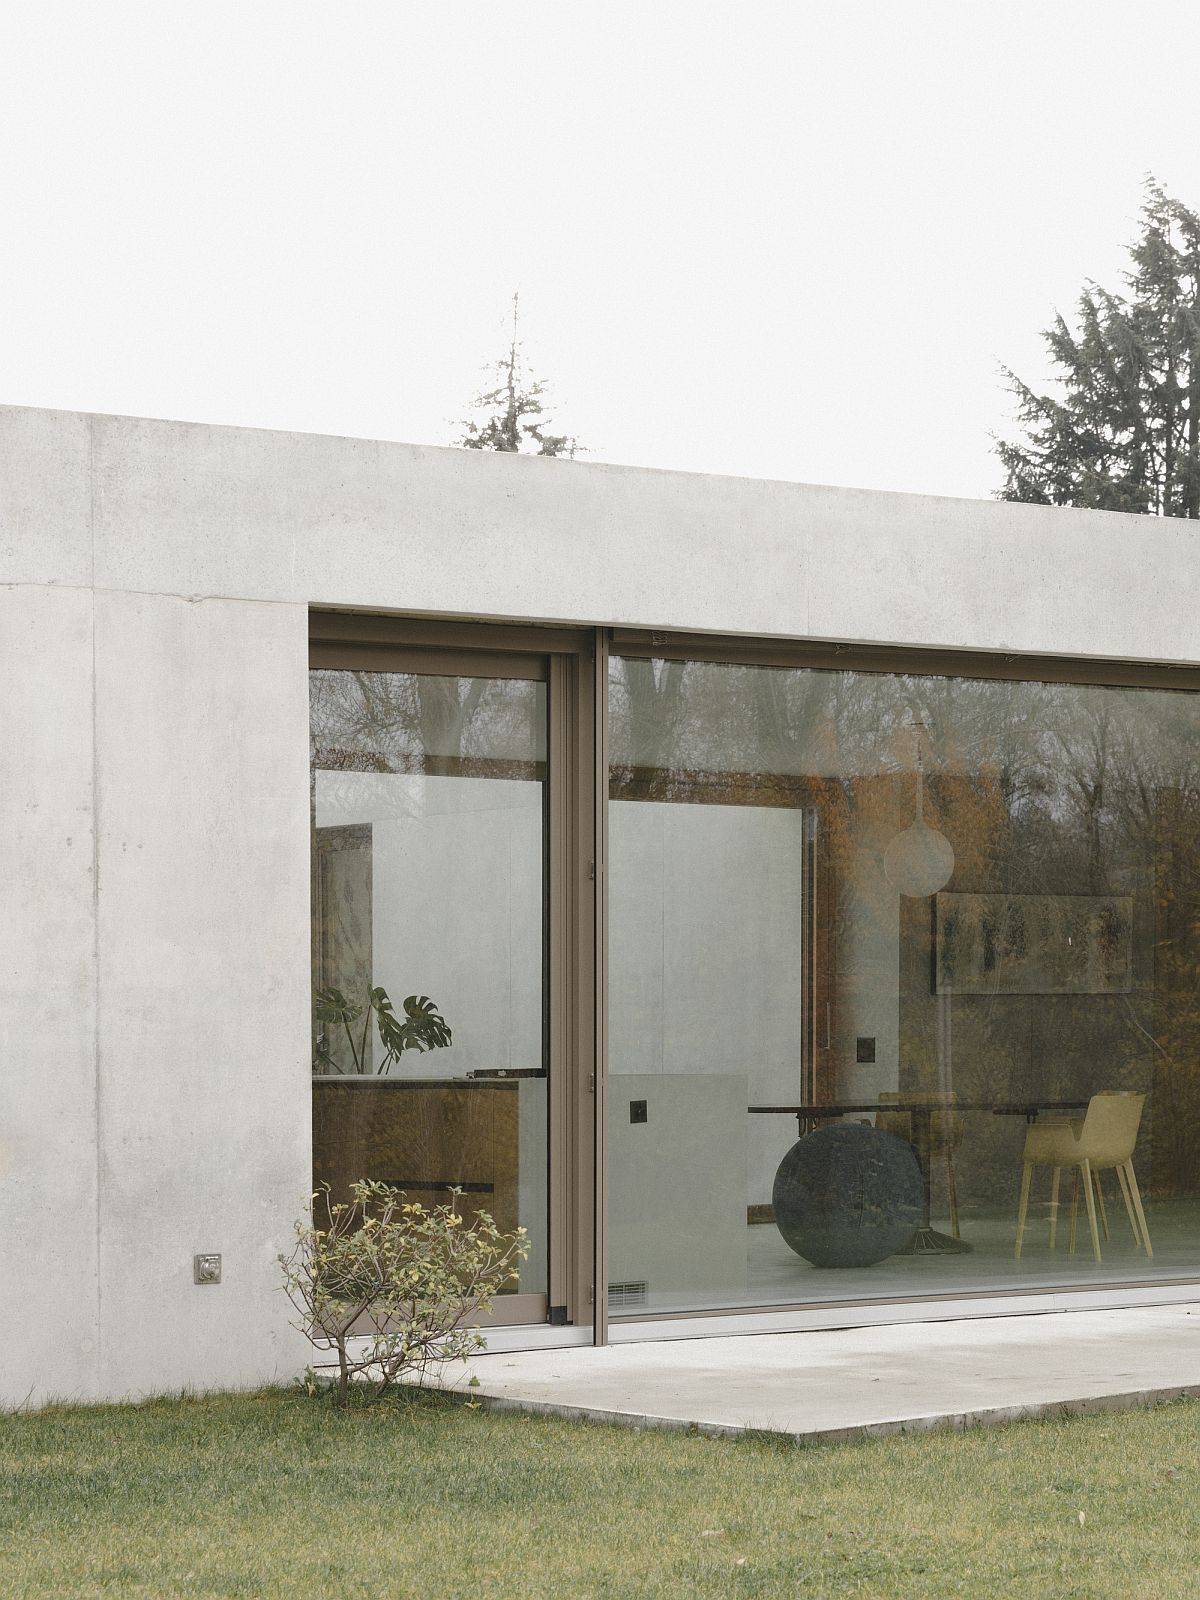 Small-concrete-deck-on-th-outside-extends-private-spaces-28808